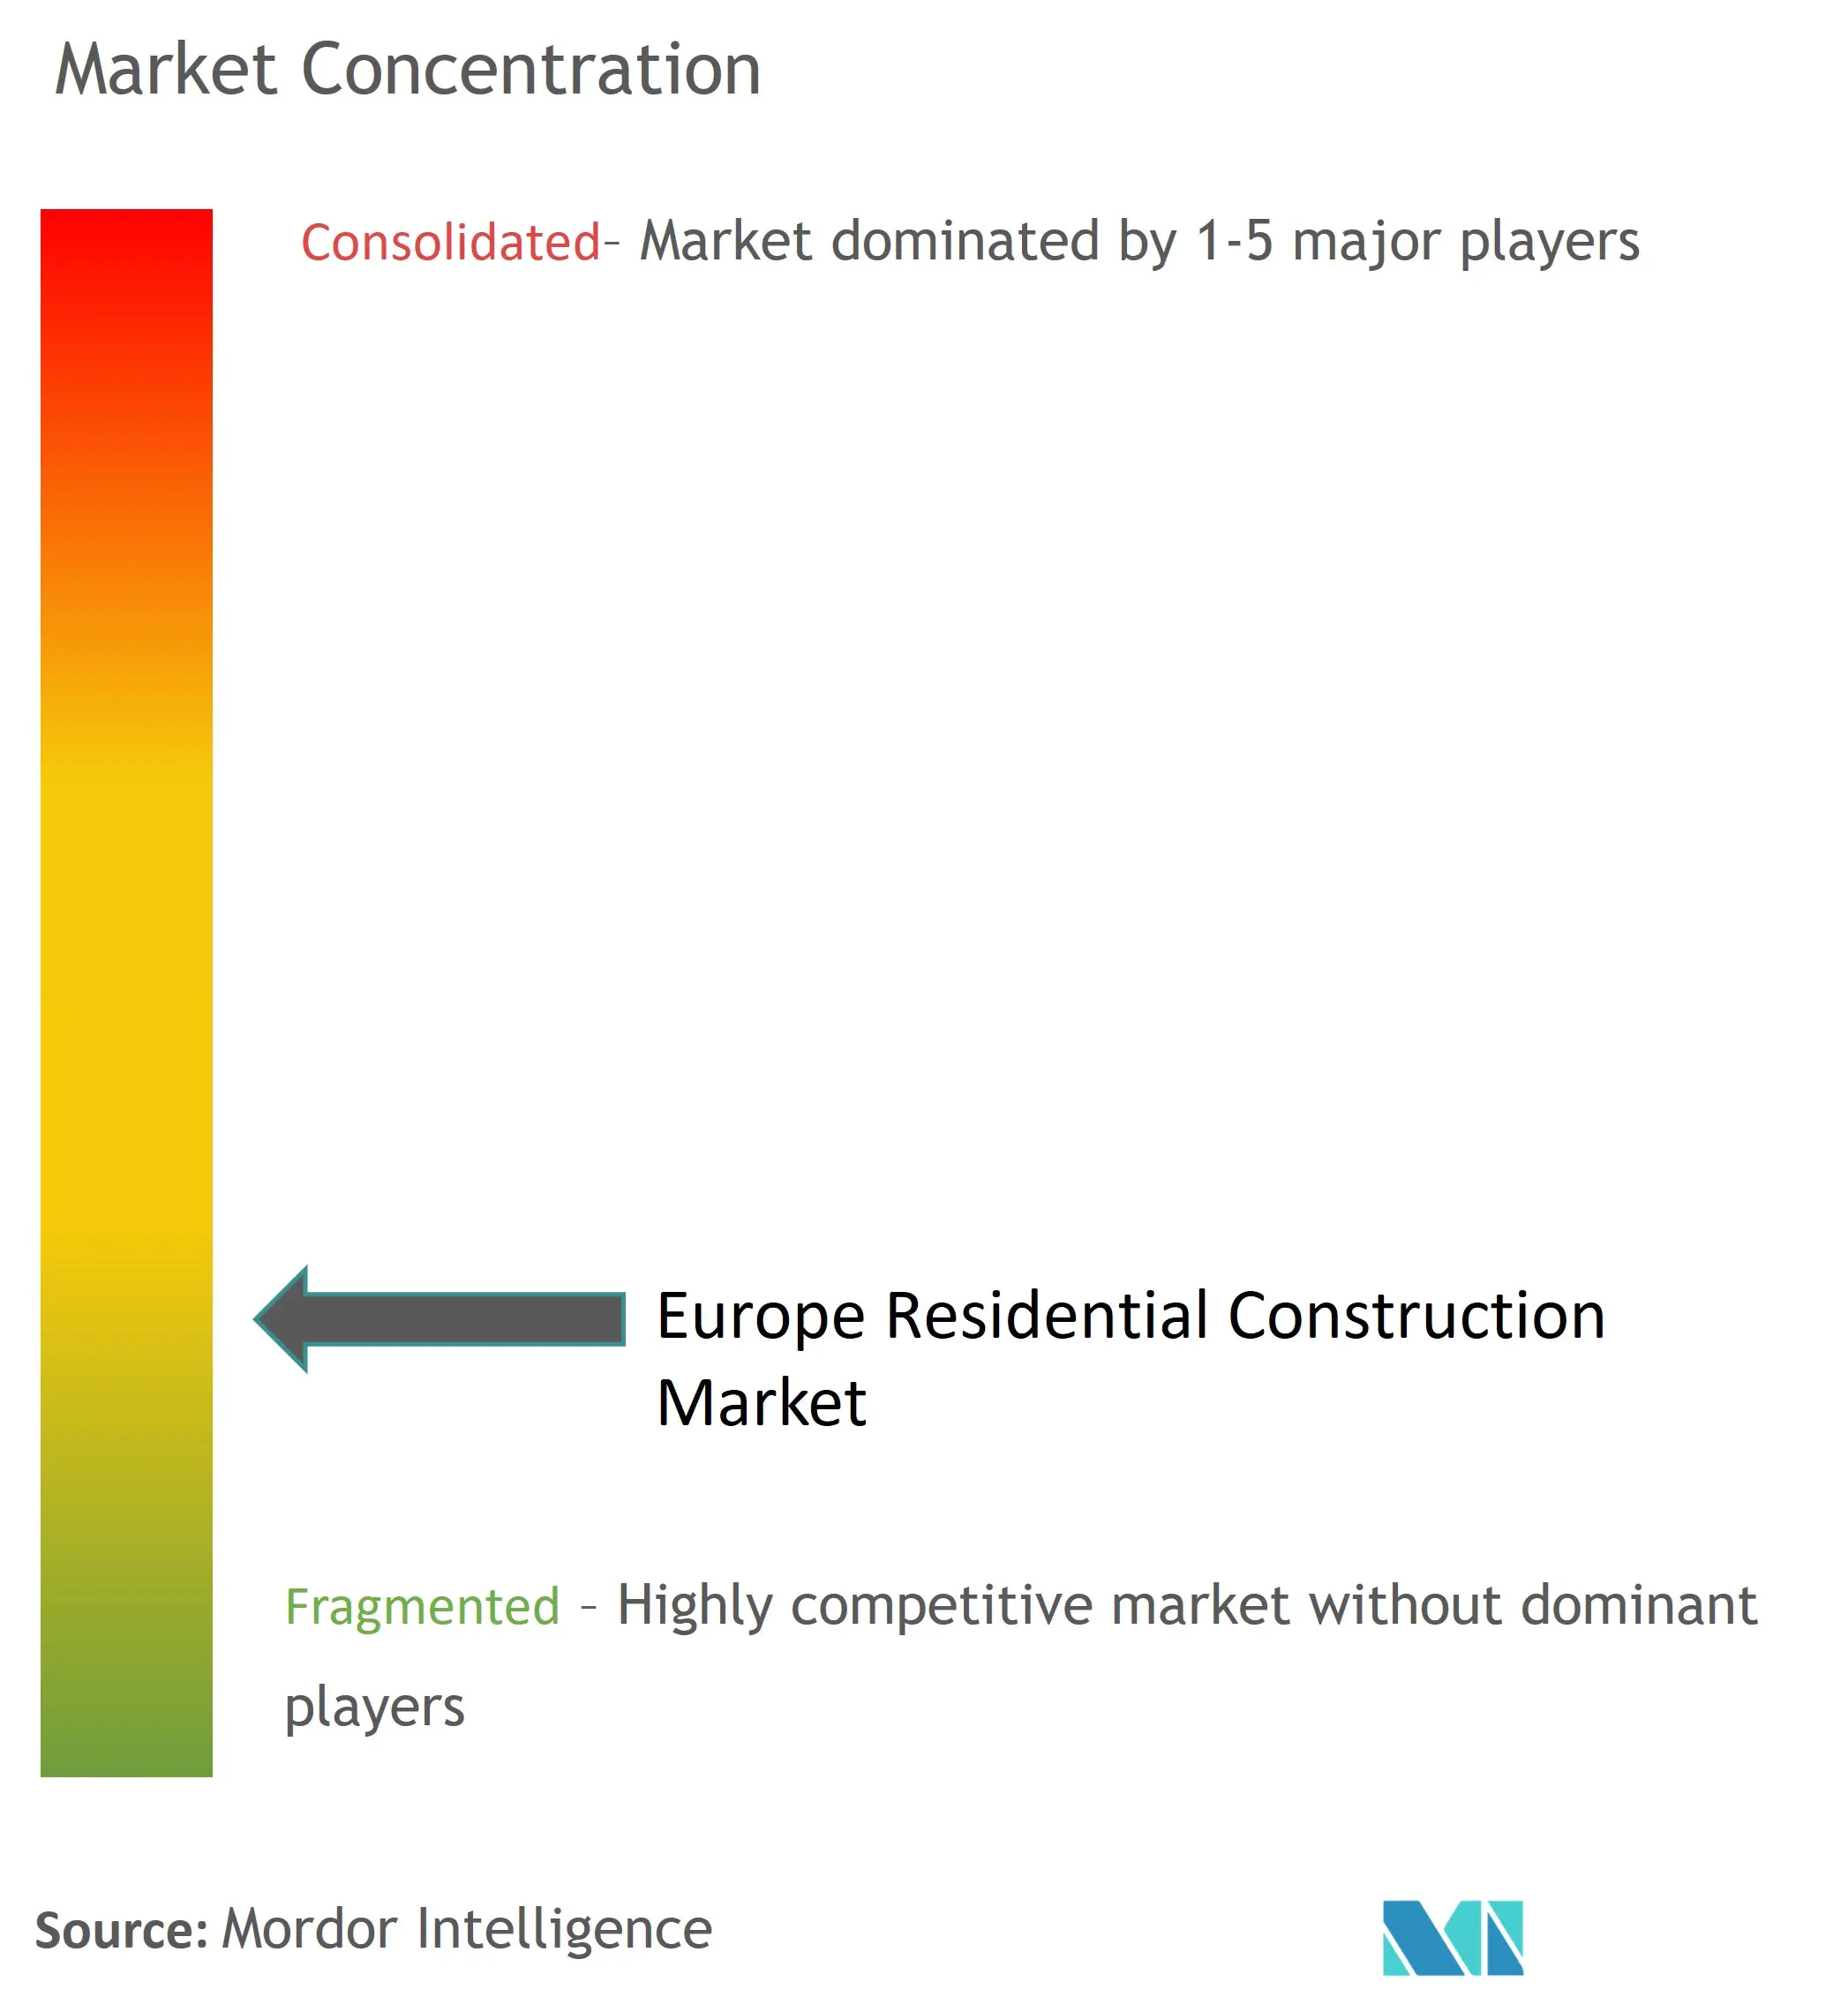 Europe Residential Construction Market Concentration